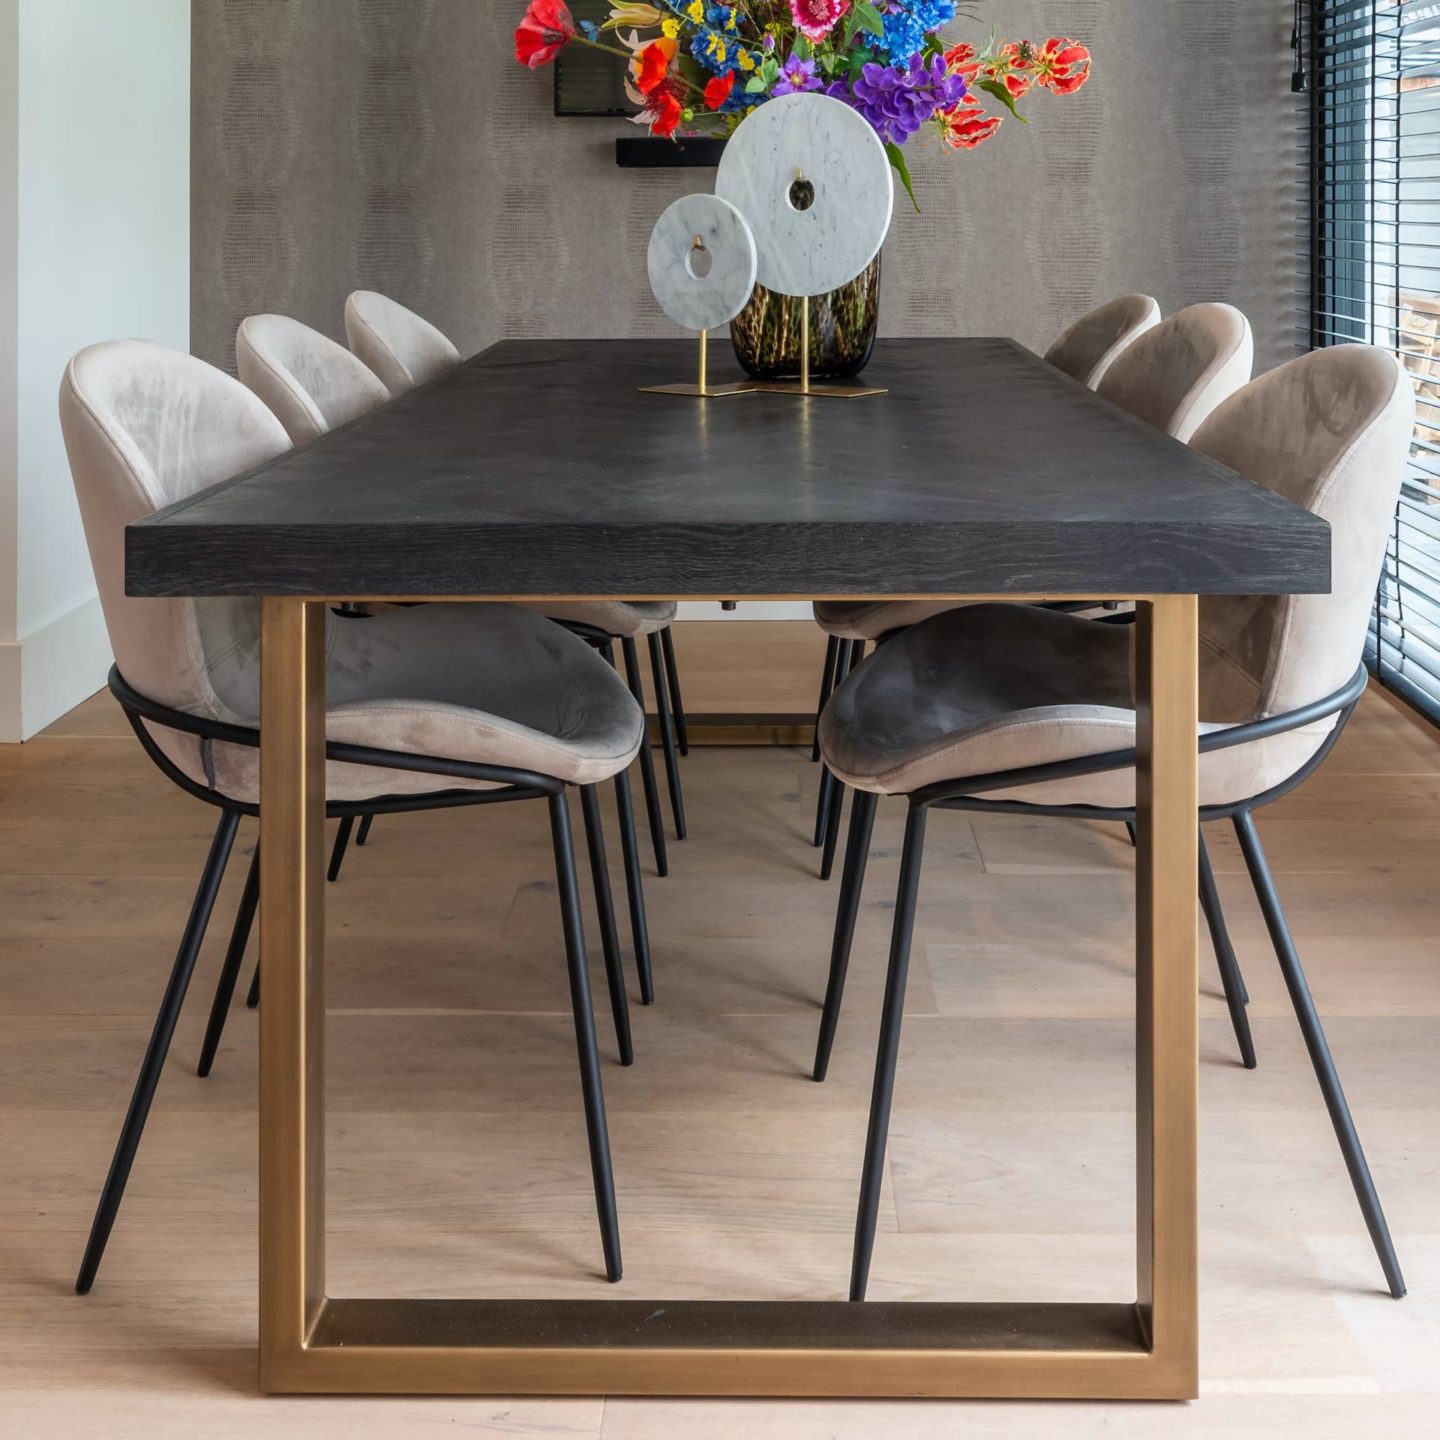 Luxury Dining Tables - Juliettes Interiors